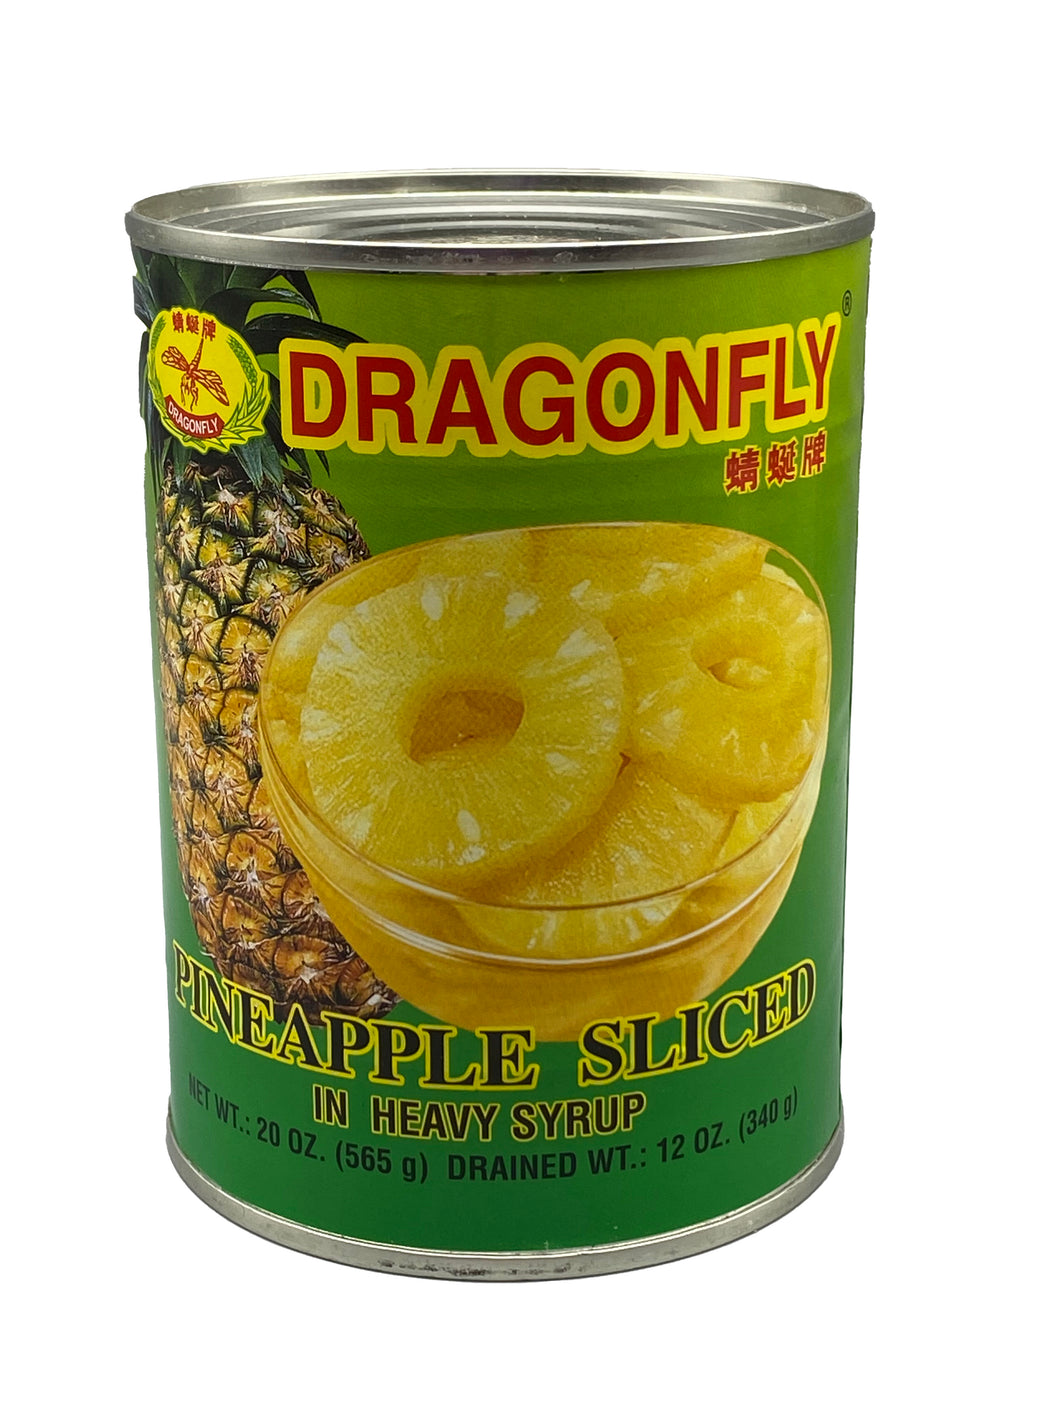 Dragonfly Pineapple Sliced in Syrup